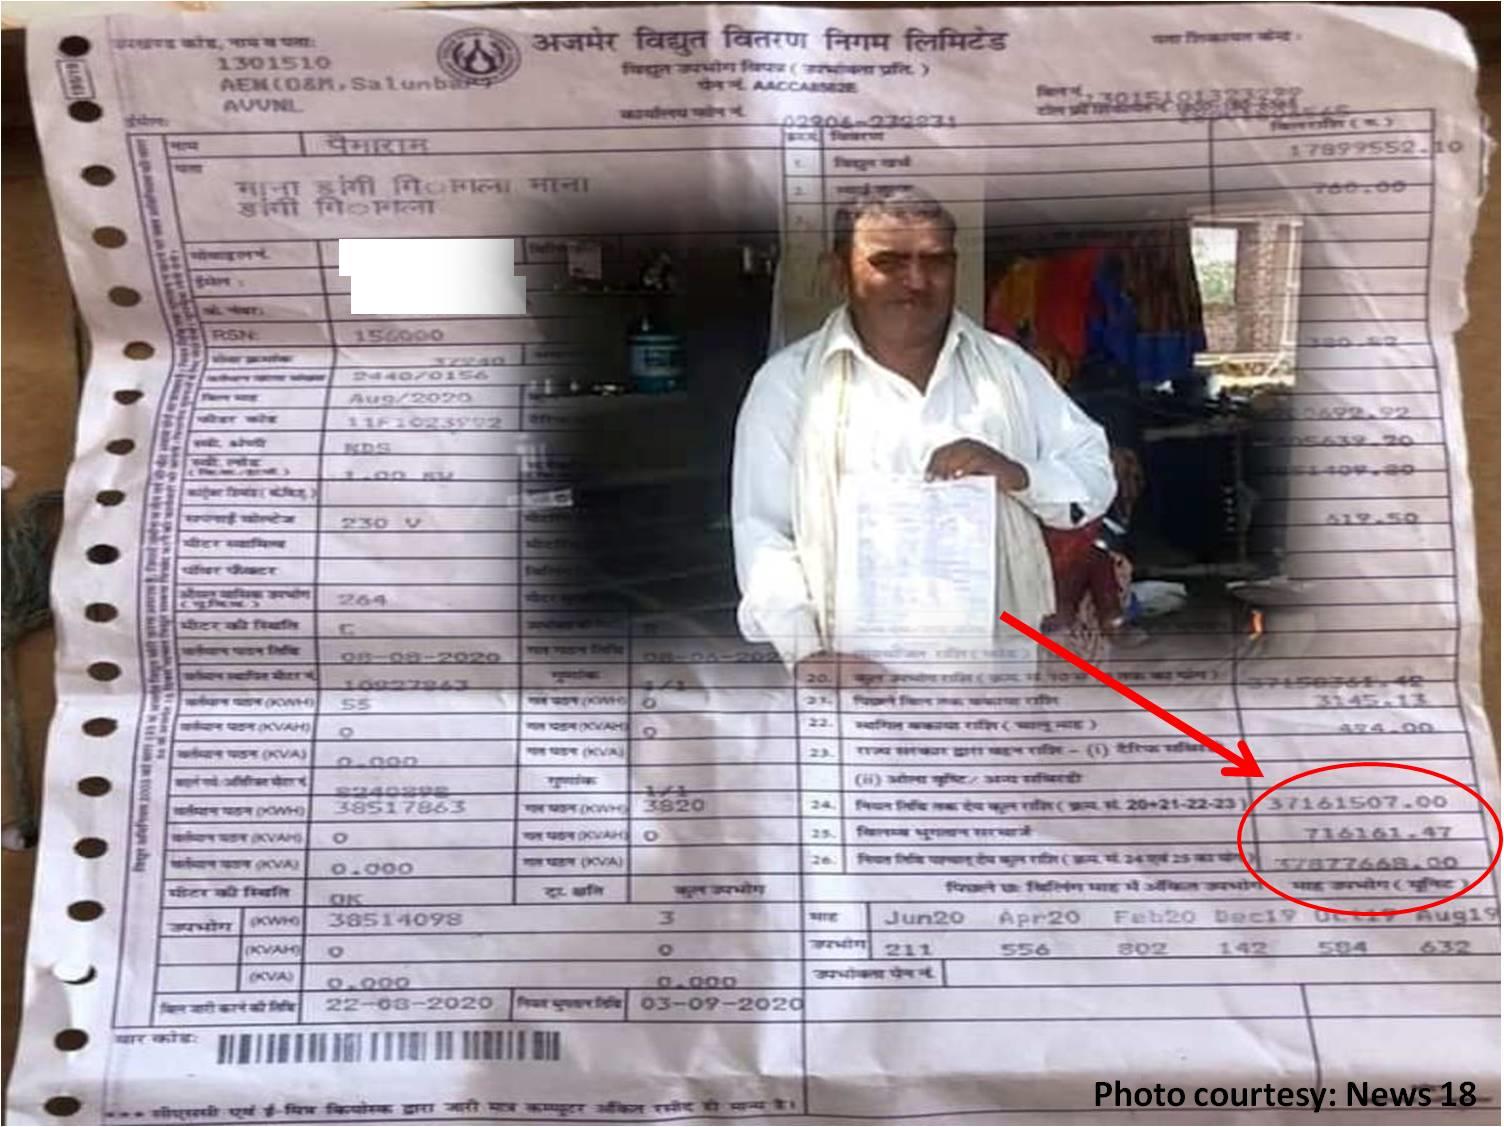 Farmer in Udaipur shocked over Rs 3,71,61,507 Electricty Bill from AVVNL